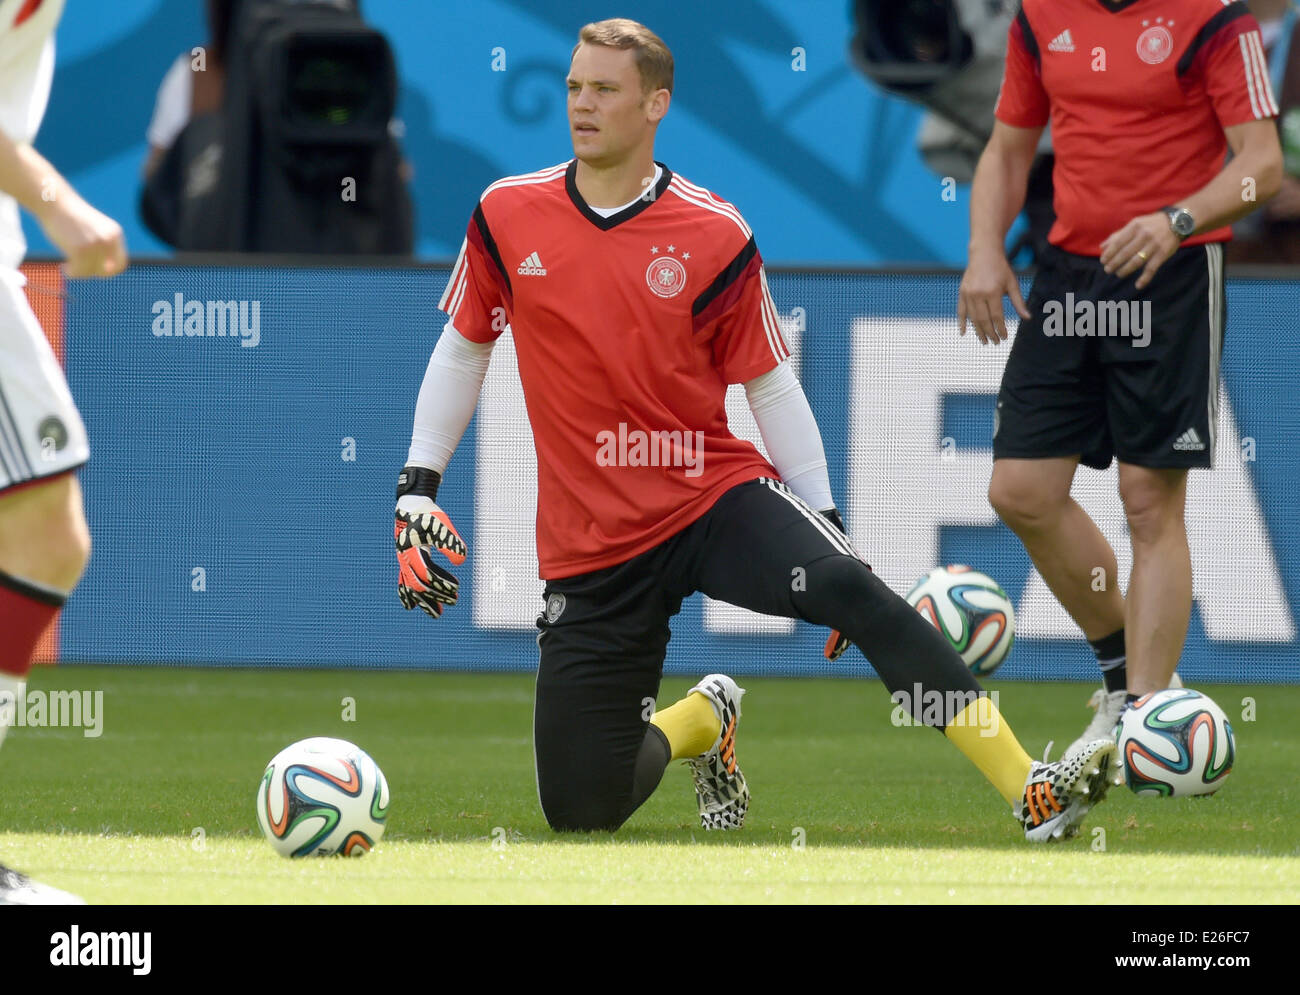 Salvador da Bahia, Brazil. 16th June, 2014. Salvador da Bahia, Brazil.  16th June, 2014. Goalkeeper Manuel Neuer of Germany warms up prior to the FIFA World Cup 2014 group G preliminary round match between Germany and Portugal at the Arena Fonte Nova Stadium in Salvador da Bahia, Brazil, 16 June 2014. Photo: Marcus Brandt/dpa/Alamy Live News EDITORIAL USE ONLY Credit:  dpa picture alliance/Alamy Live News Stock Photo